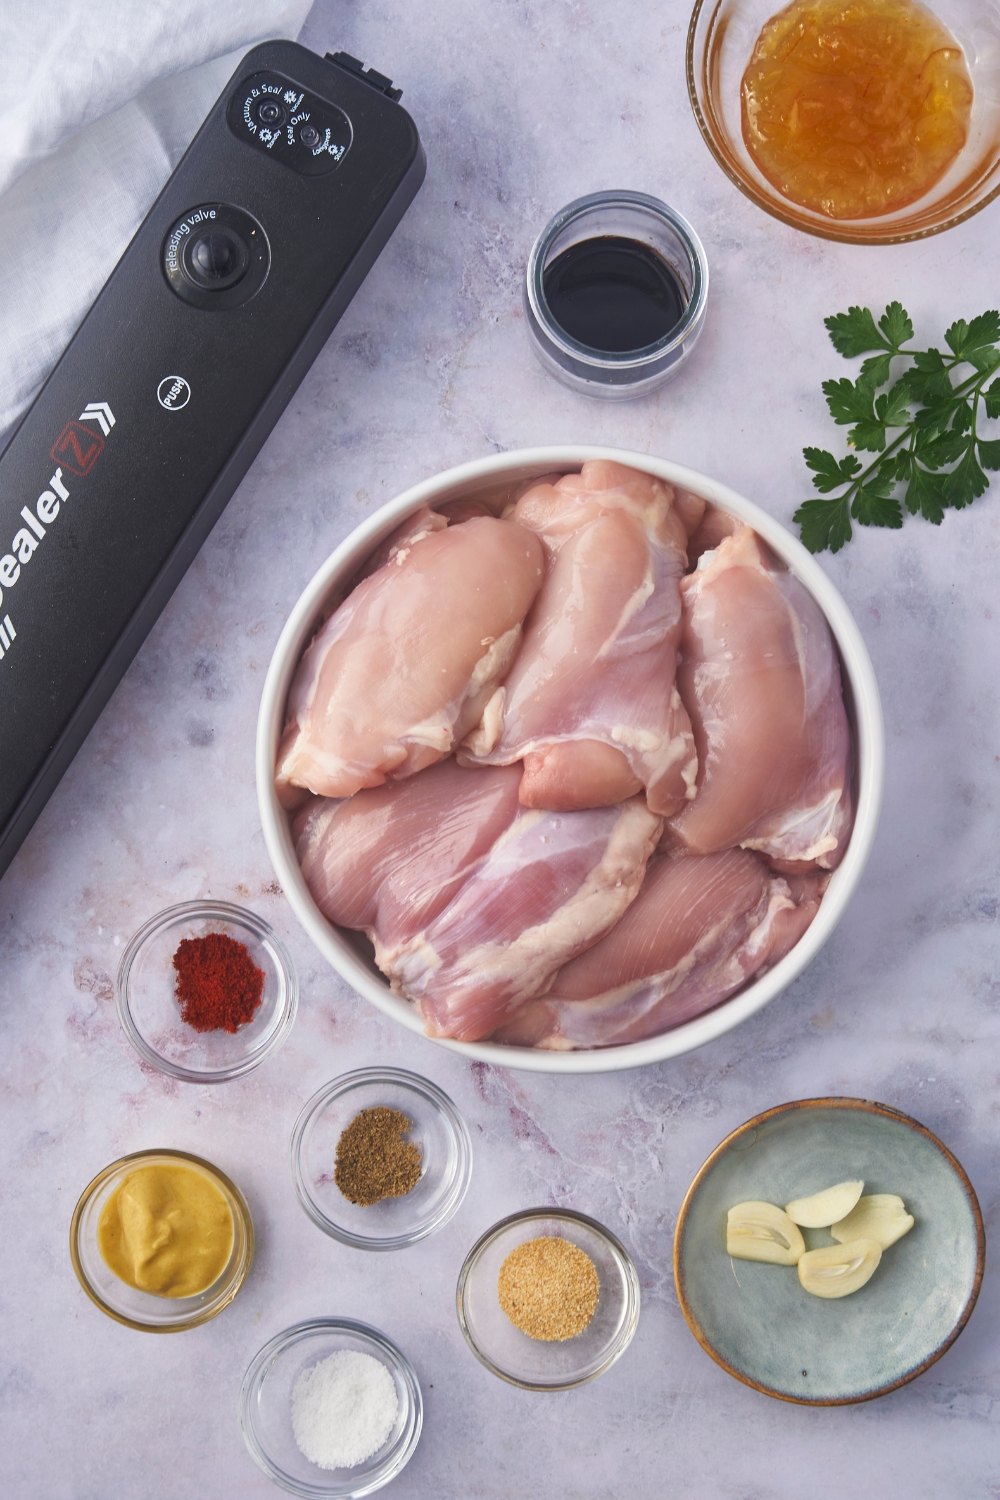 A vacuum-sealer next to an assortment of ingredients including a bowl of raw chicken thighs and small bowls of mustard, paprika, garlic, and orange marmalade.